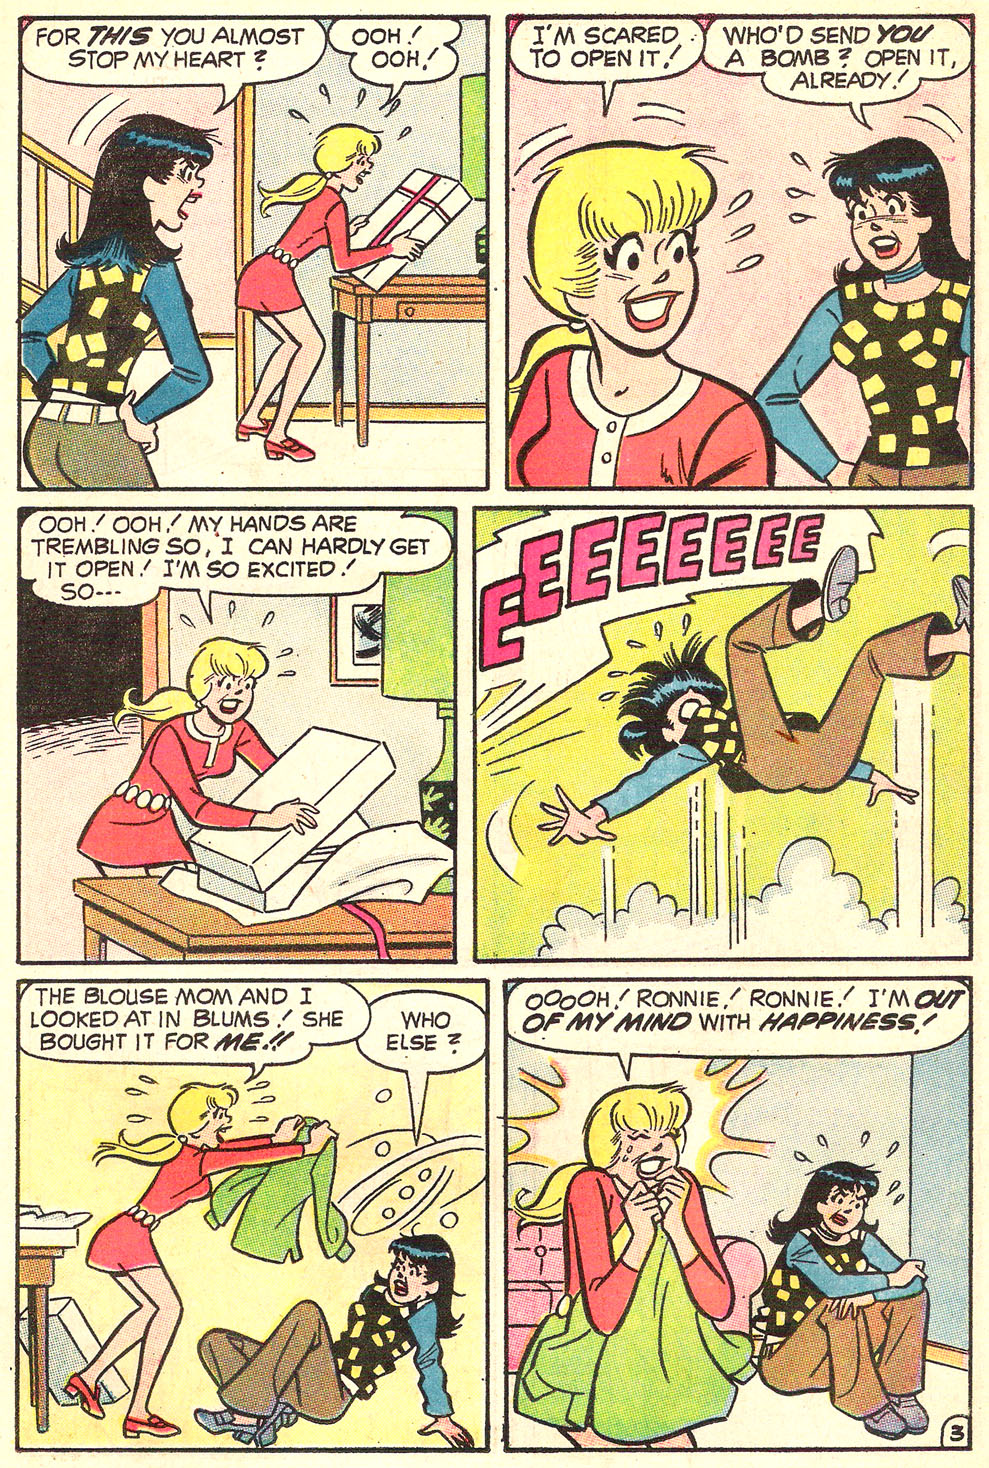 Read online Archie's Girls Betty and Veronica comic -  Issue #186 - 15